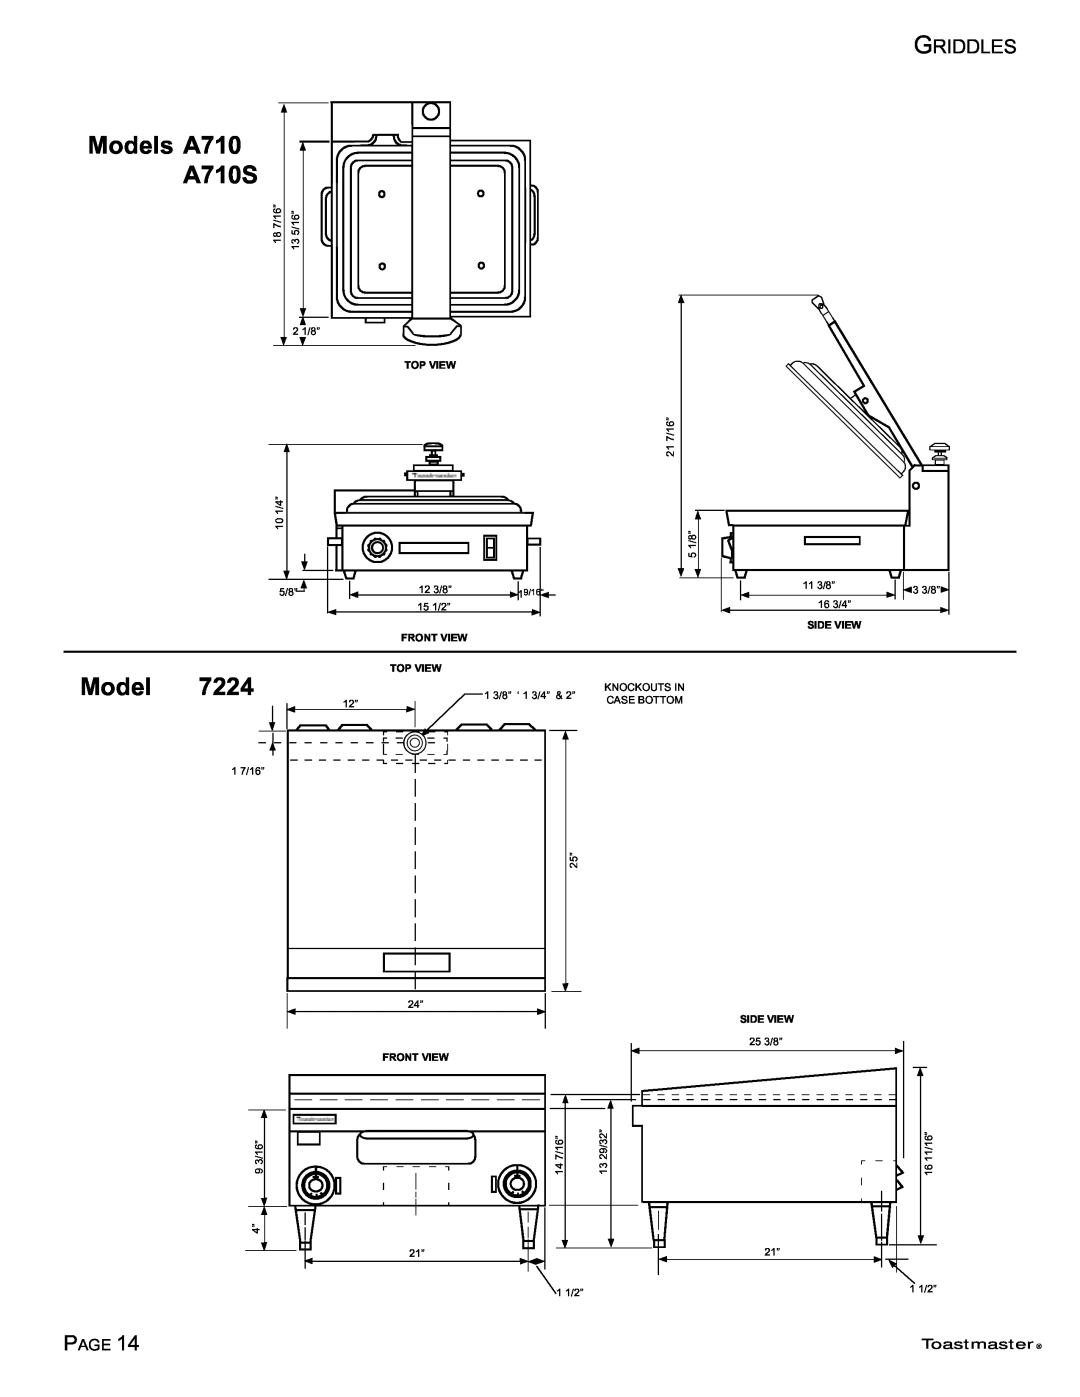 Toastmaster 7236, 7336, 7324, 7348, 7224 manual Models A710 A710S, Page, Toastmaster, Top View, Front View, Side View 